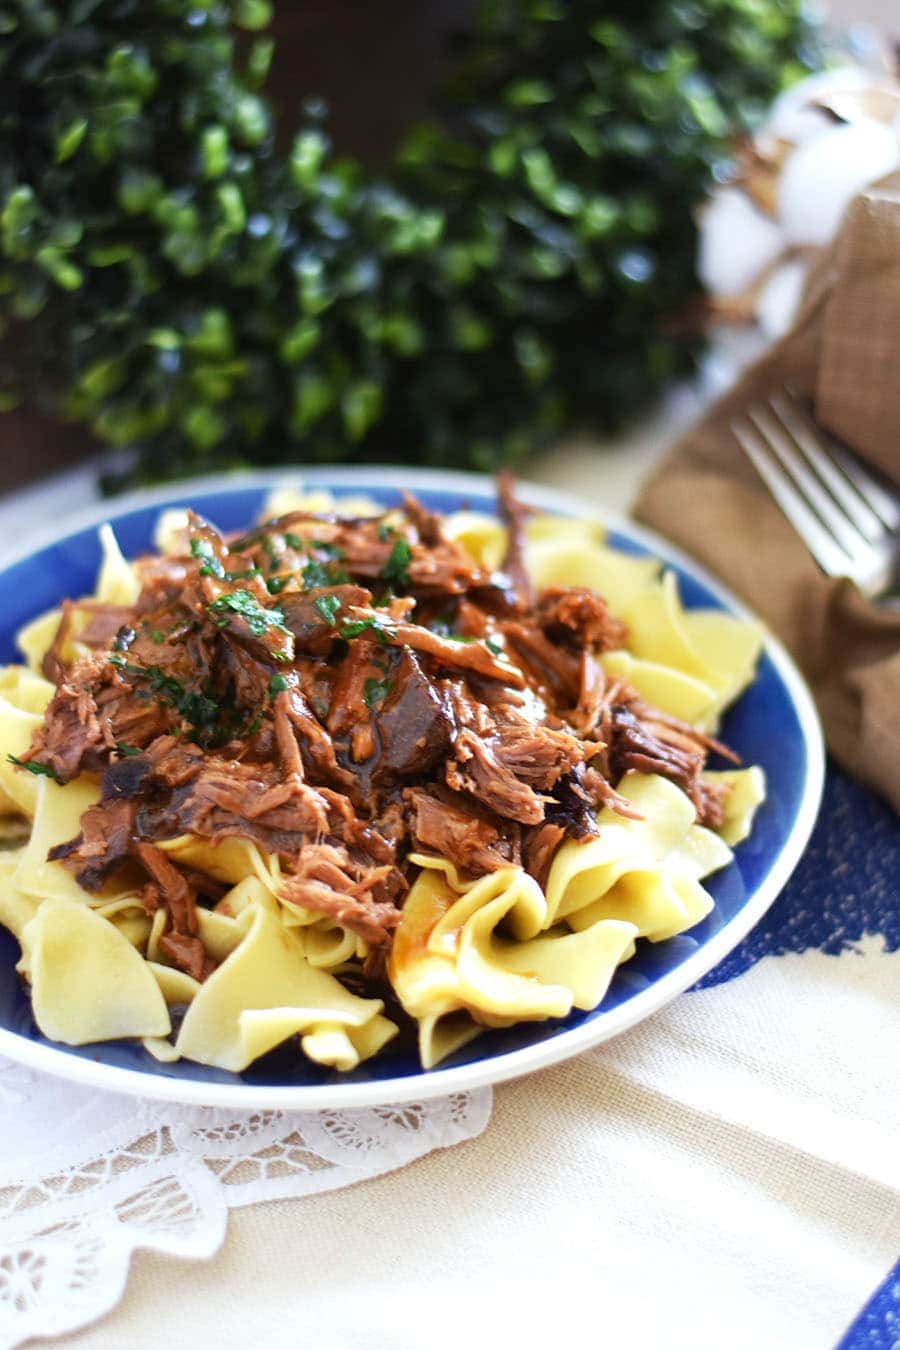 a blue plate with egg noodles and a serving of shredded slow cooker mississippi pot roast